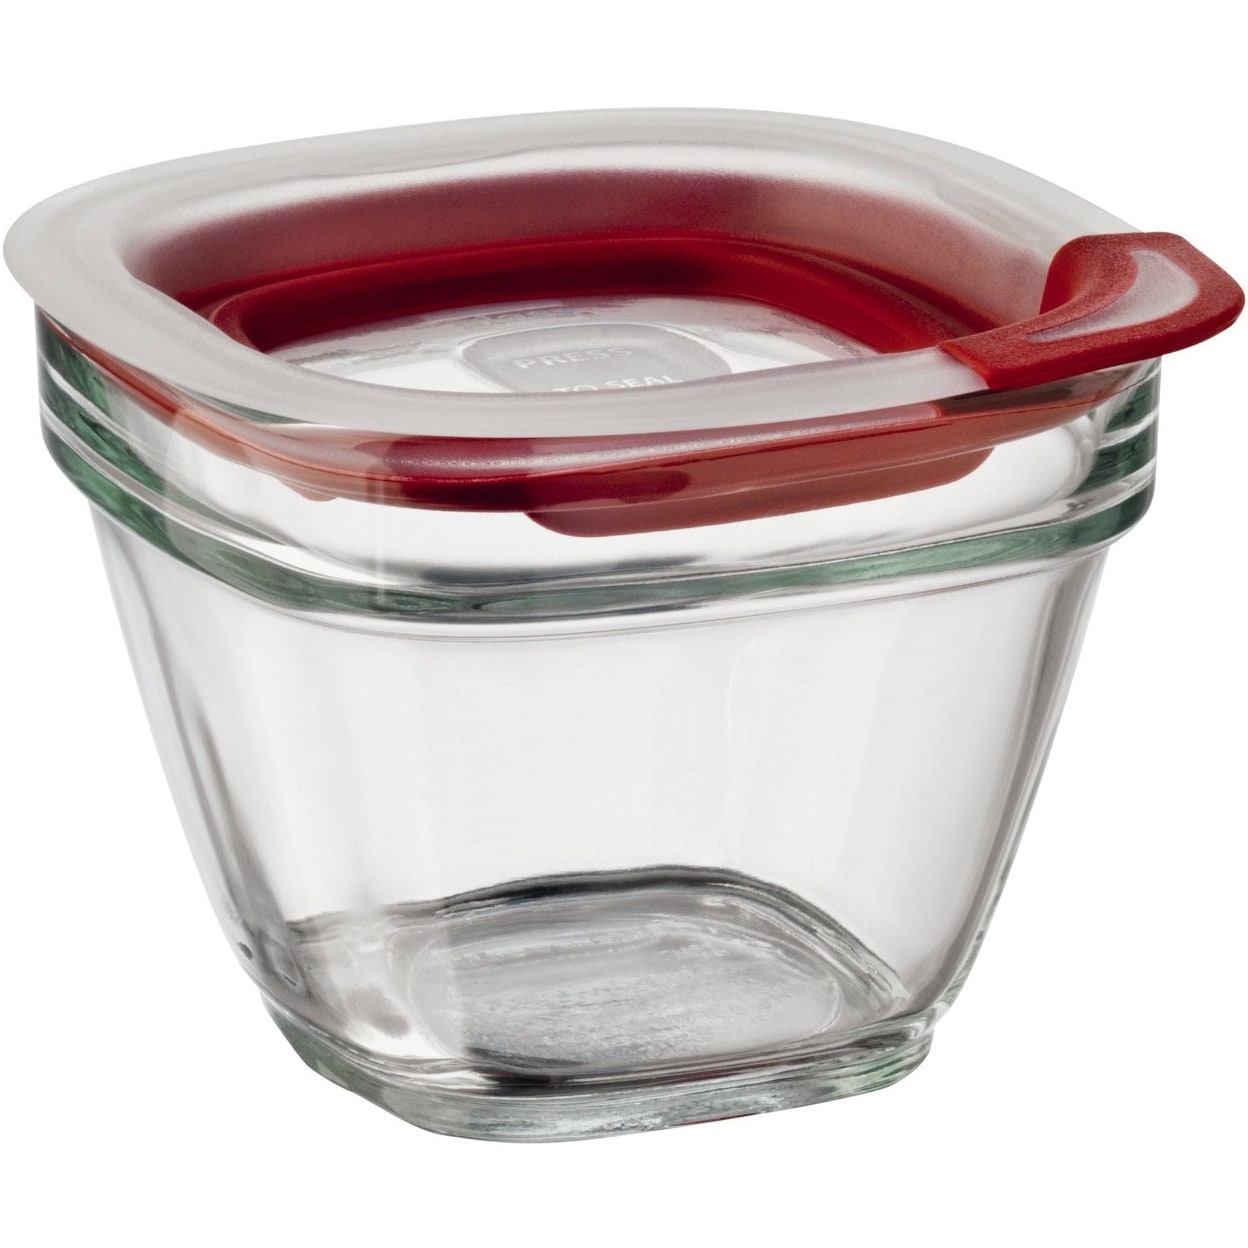 Rubbermaid Easy Find Lids Container, Easy Find Lids, 1.2 Liter, Plastic  Containers